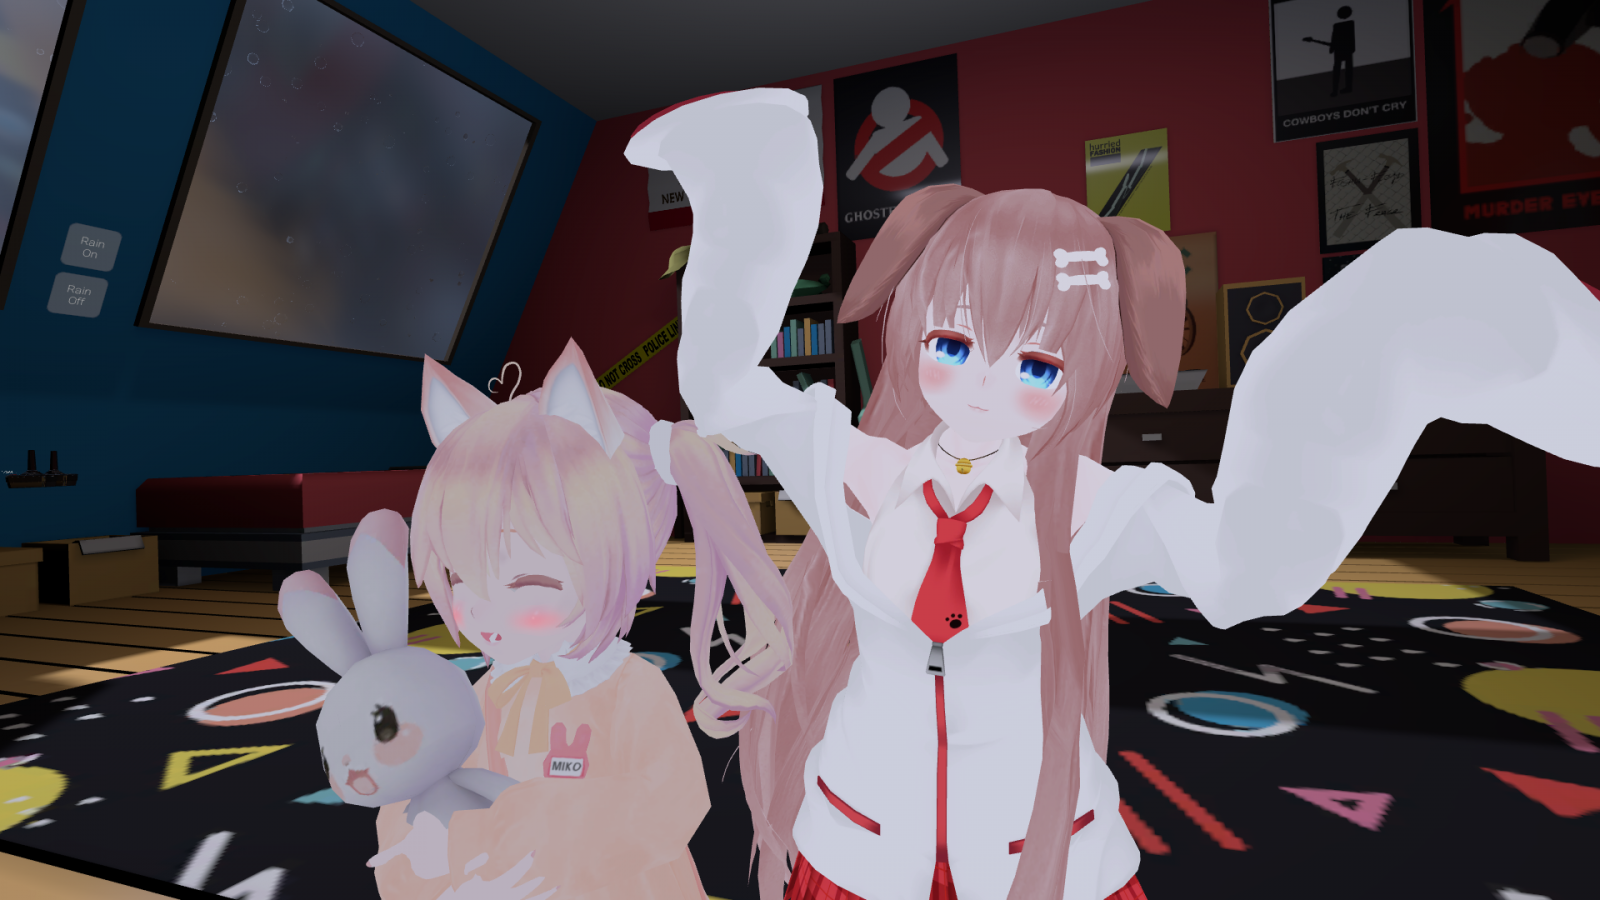 VRChat_1920x1080_2020-11-13_17-35-55.206.png